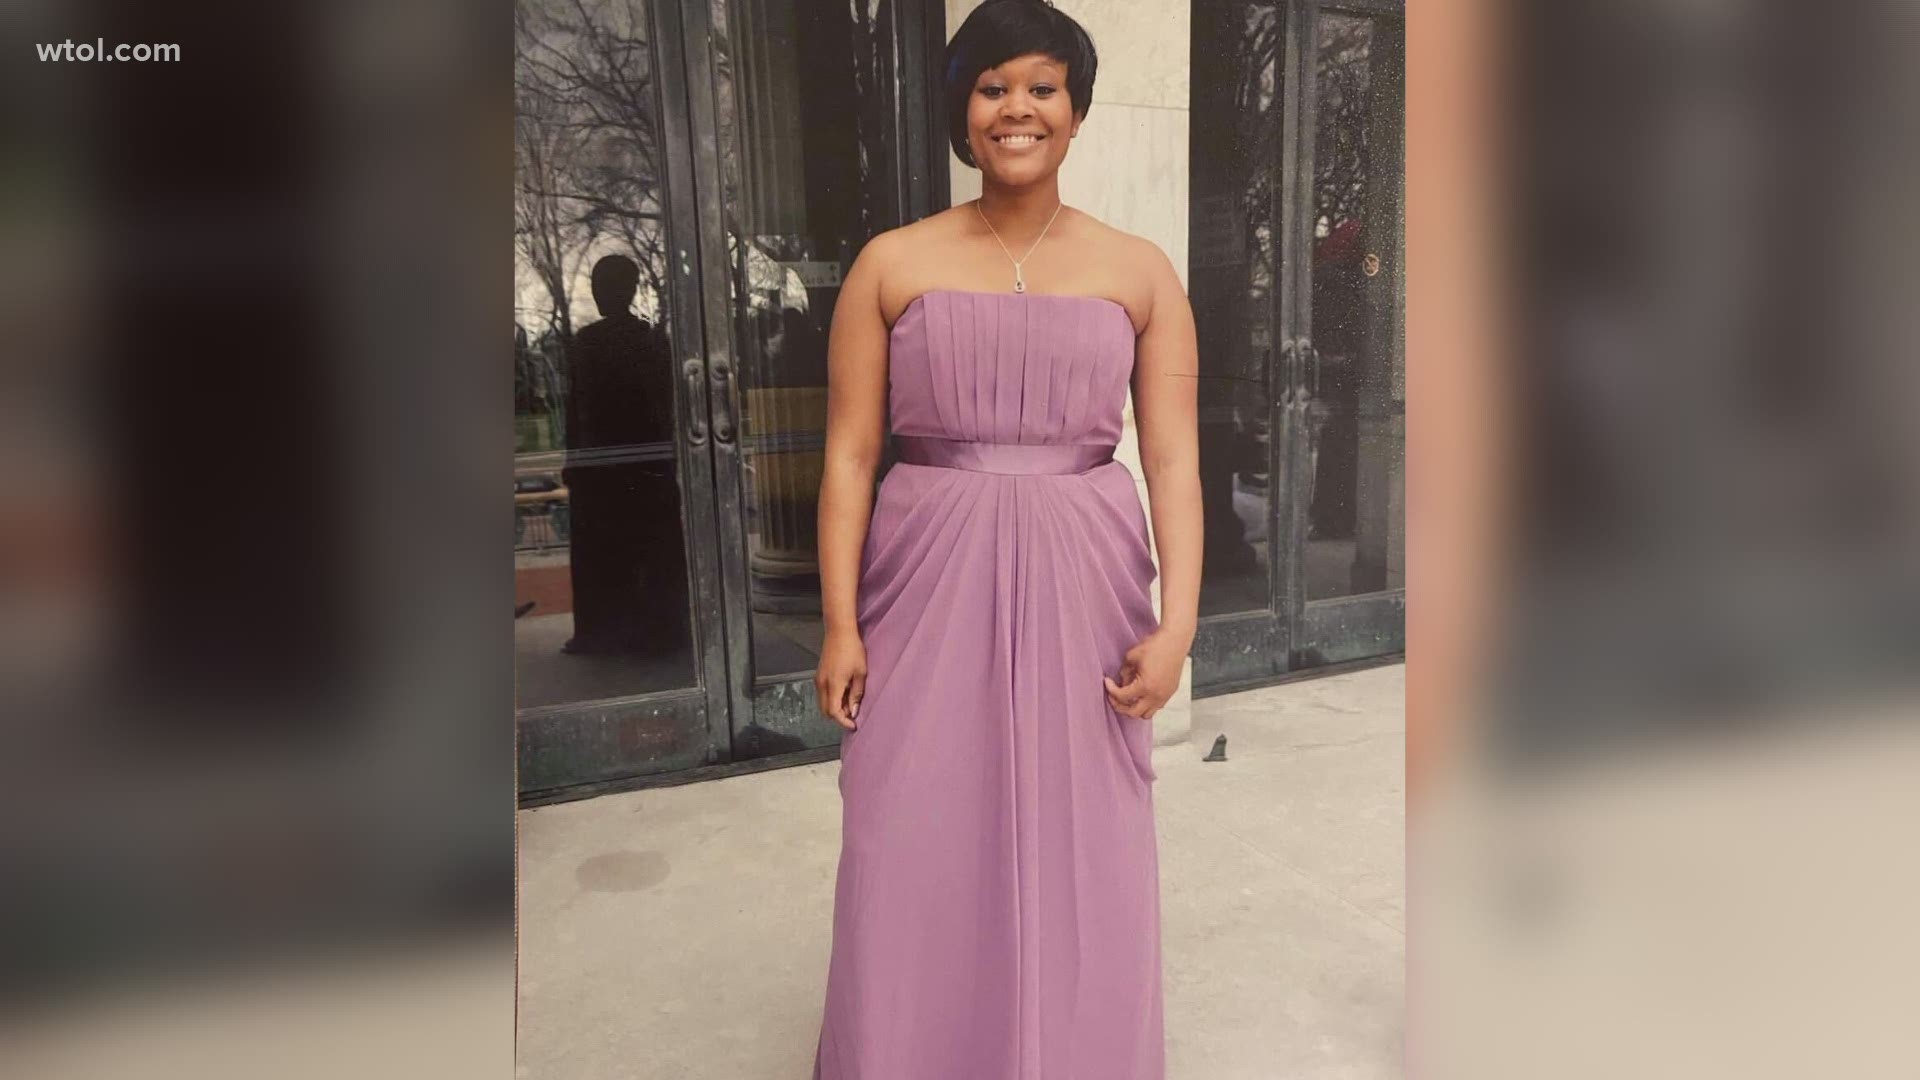 Vania Underwood was an RN at the COVID-19 unit at St. Vincent Medical Center. She had just turned 36 when she died following a brief battle with COVID-19.